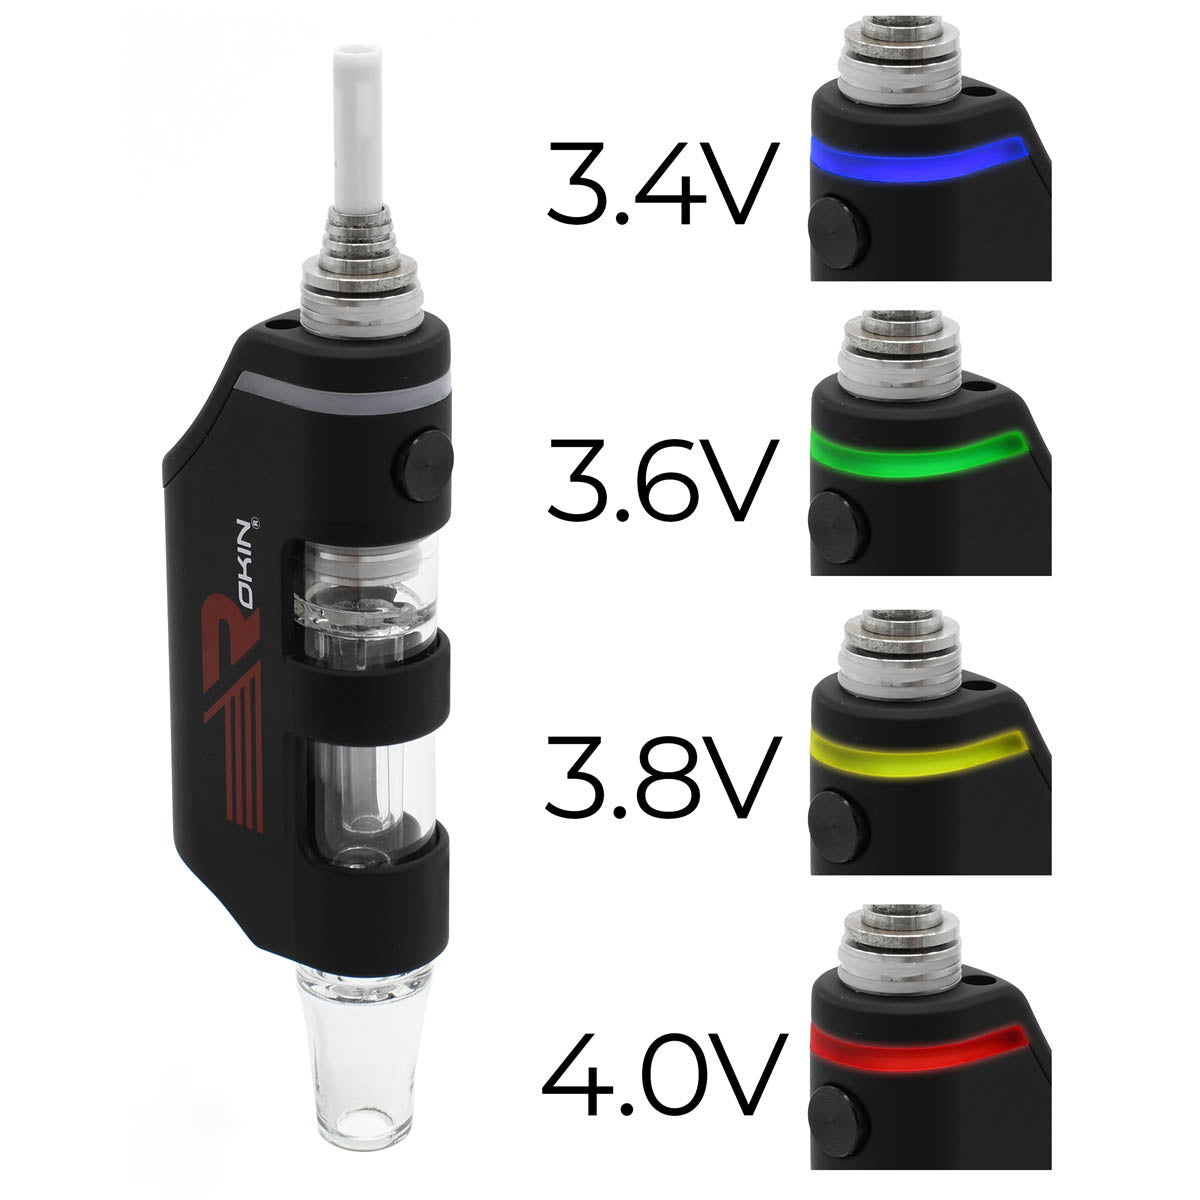 Rokin Stinger Nectar Collector 4 voltage settings with LED color indicator